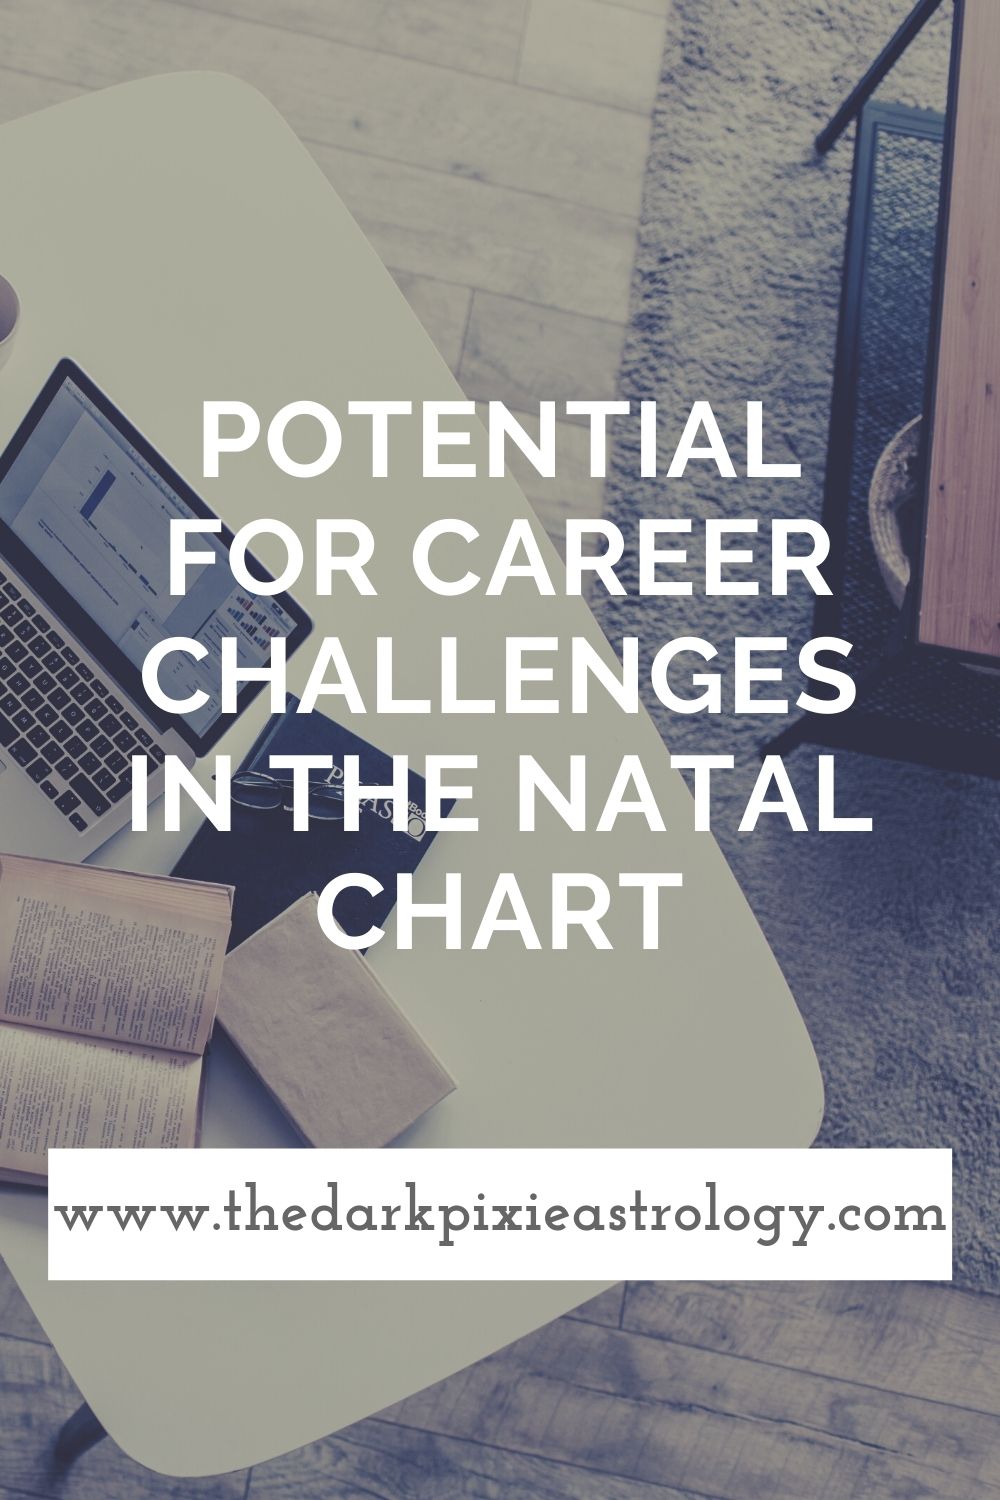 Potential for Career Challenges in the Natal Chart - The Dark Pixie Astrology